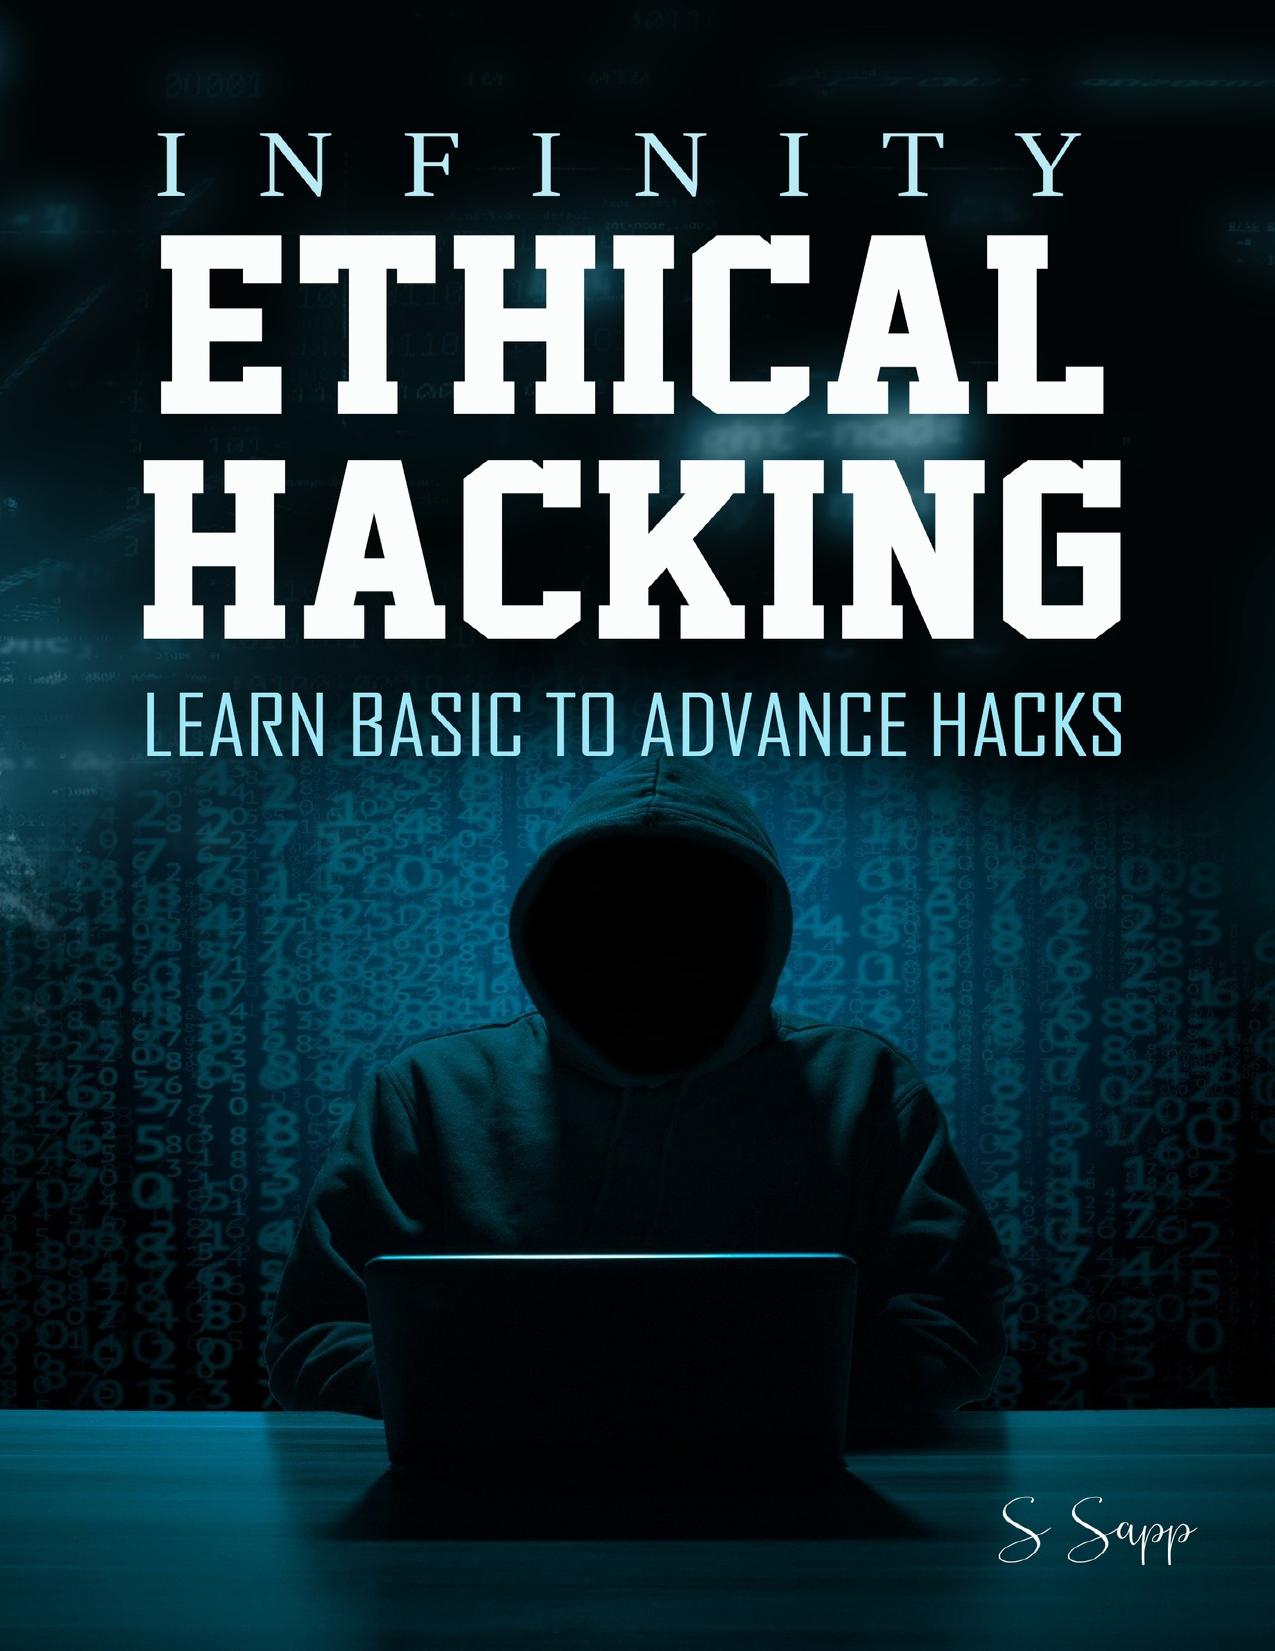 Infinity Ethical Hacking: Learn basic to advance hacks by Sapp Arthur S